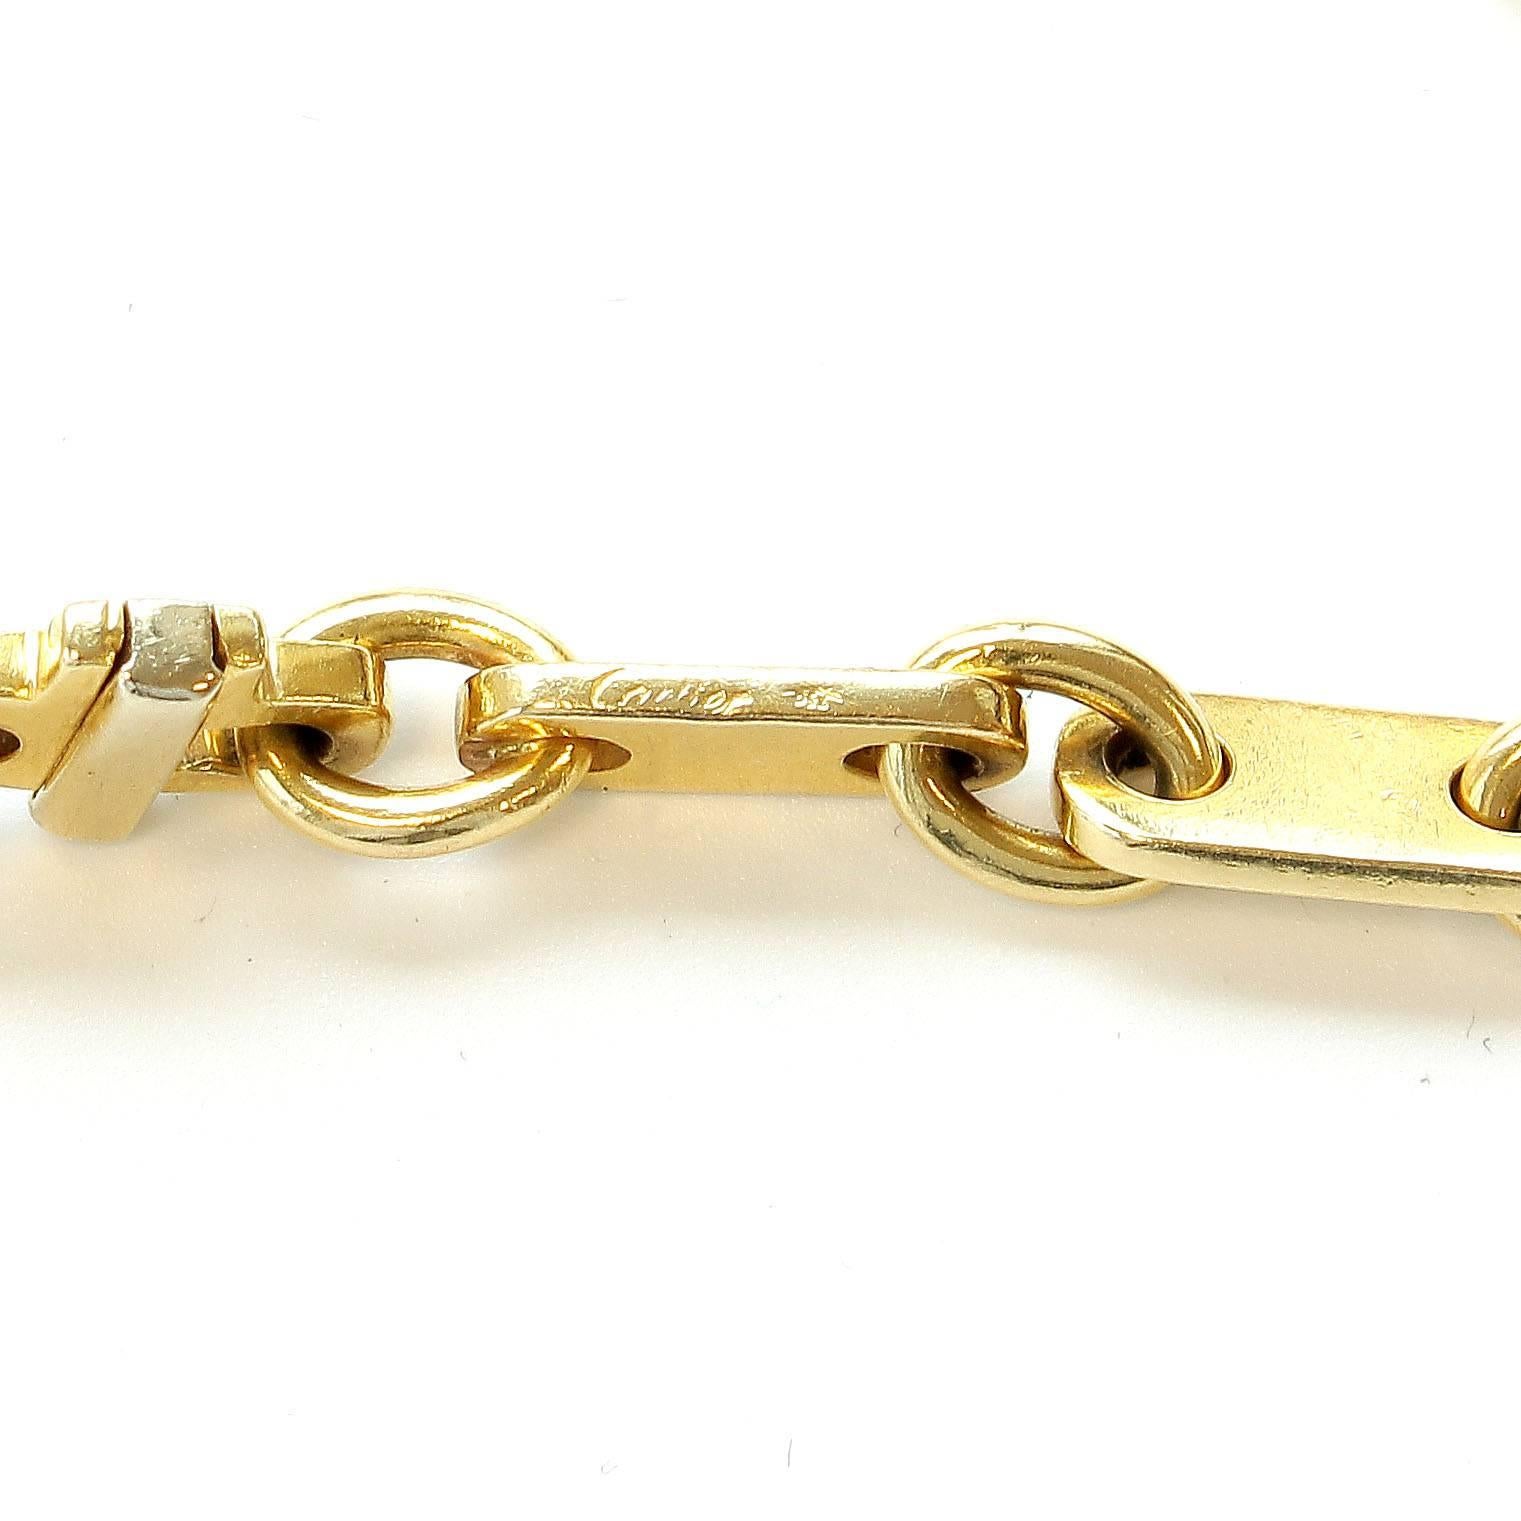 Simply Cartier. Elegant links of glistening 18k yellow gold interlocking to create this bracelet. Signed Cartier.